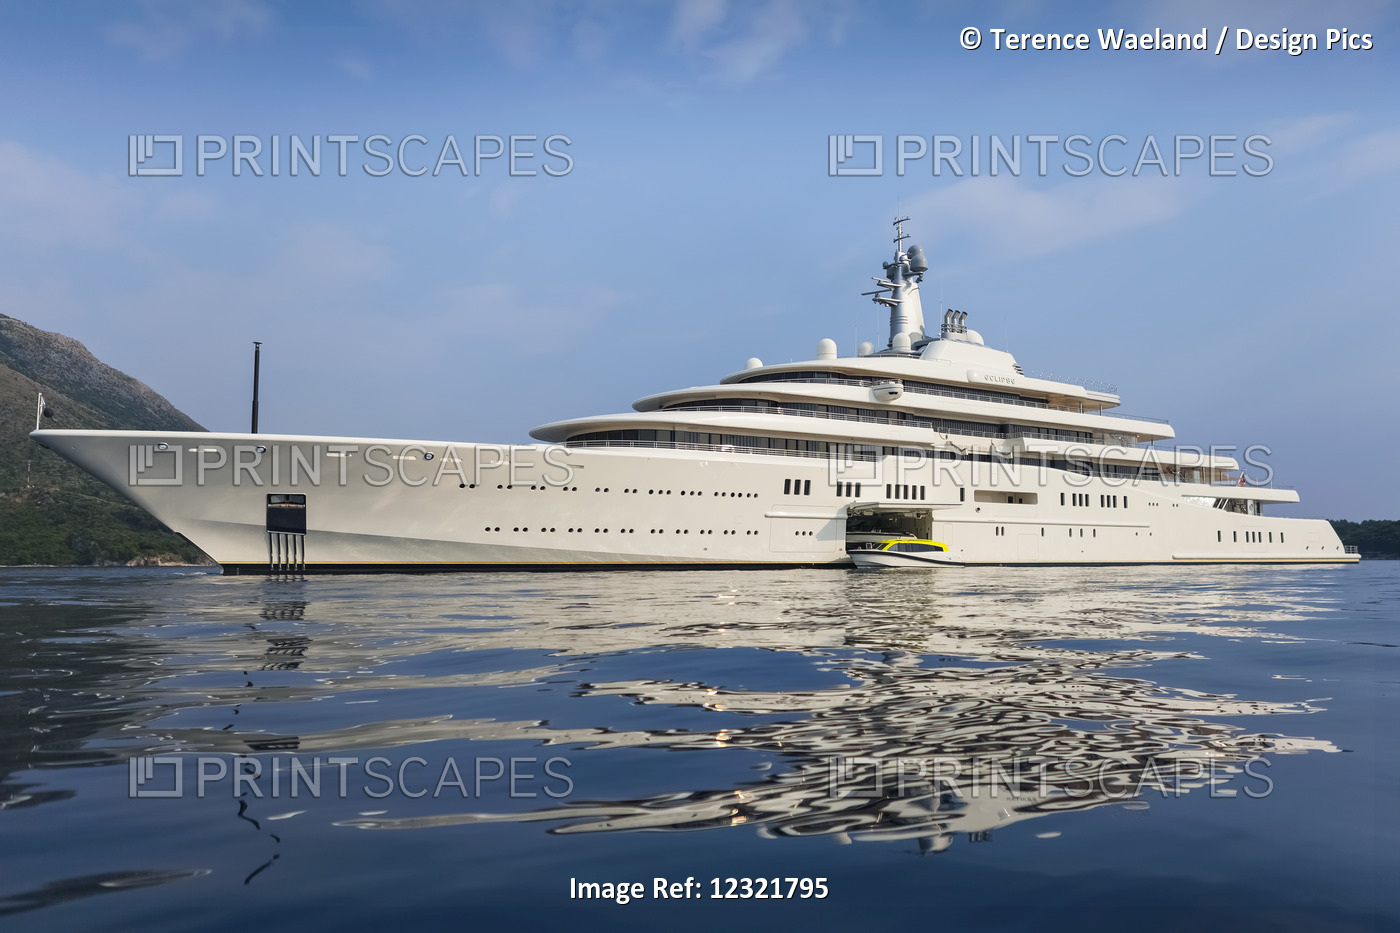 Eclipse Yacht, The World's Second Largest, Belonging To Roman Abramovich, ...